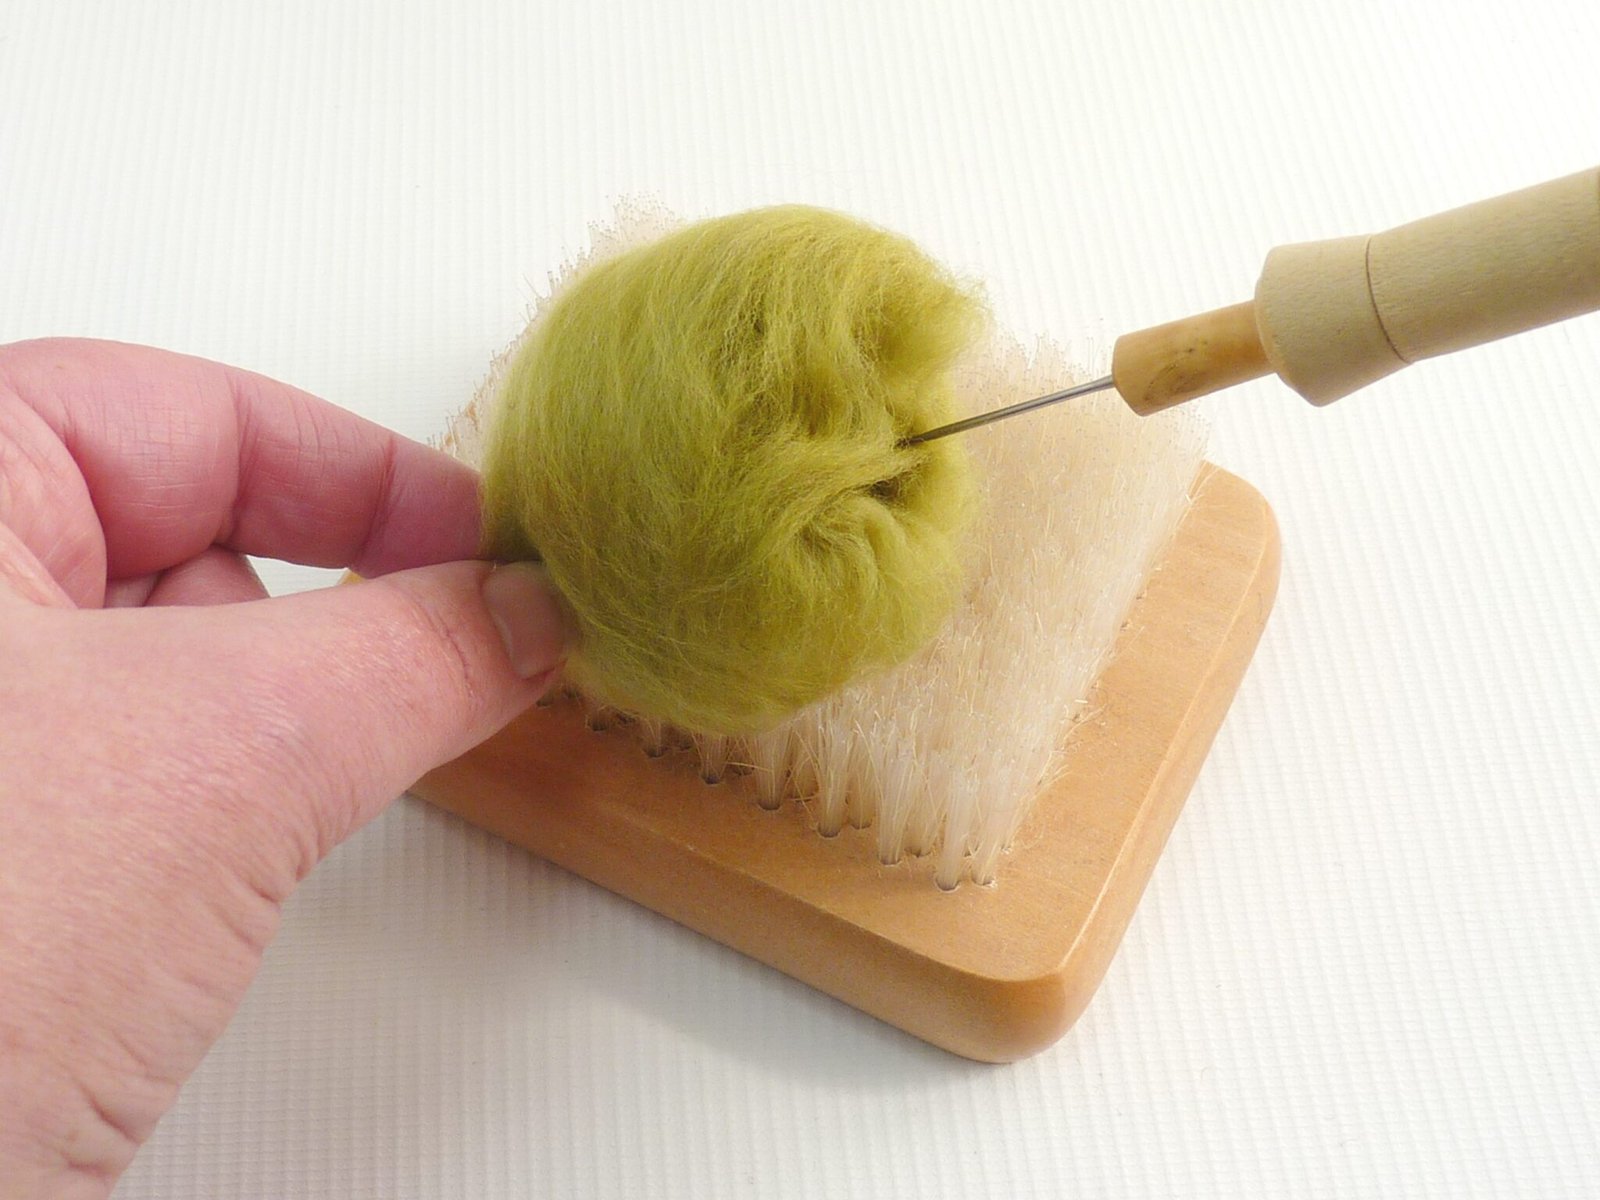 How to join yarn and finish garments with a felting needle - The Blog -  US/UK